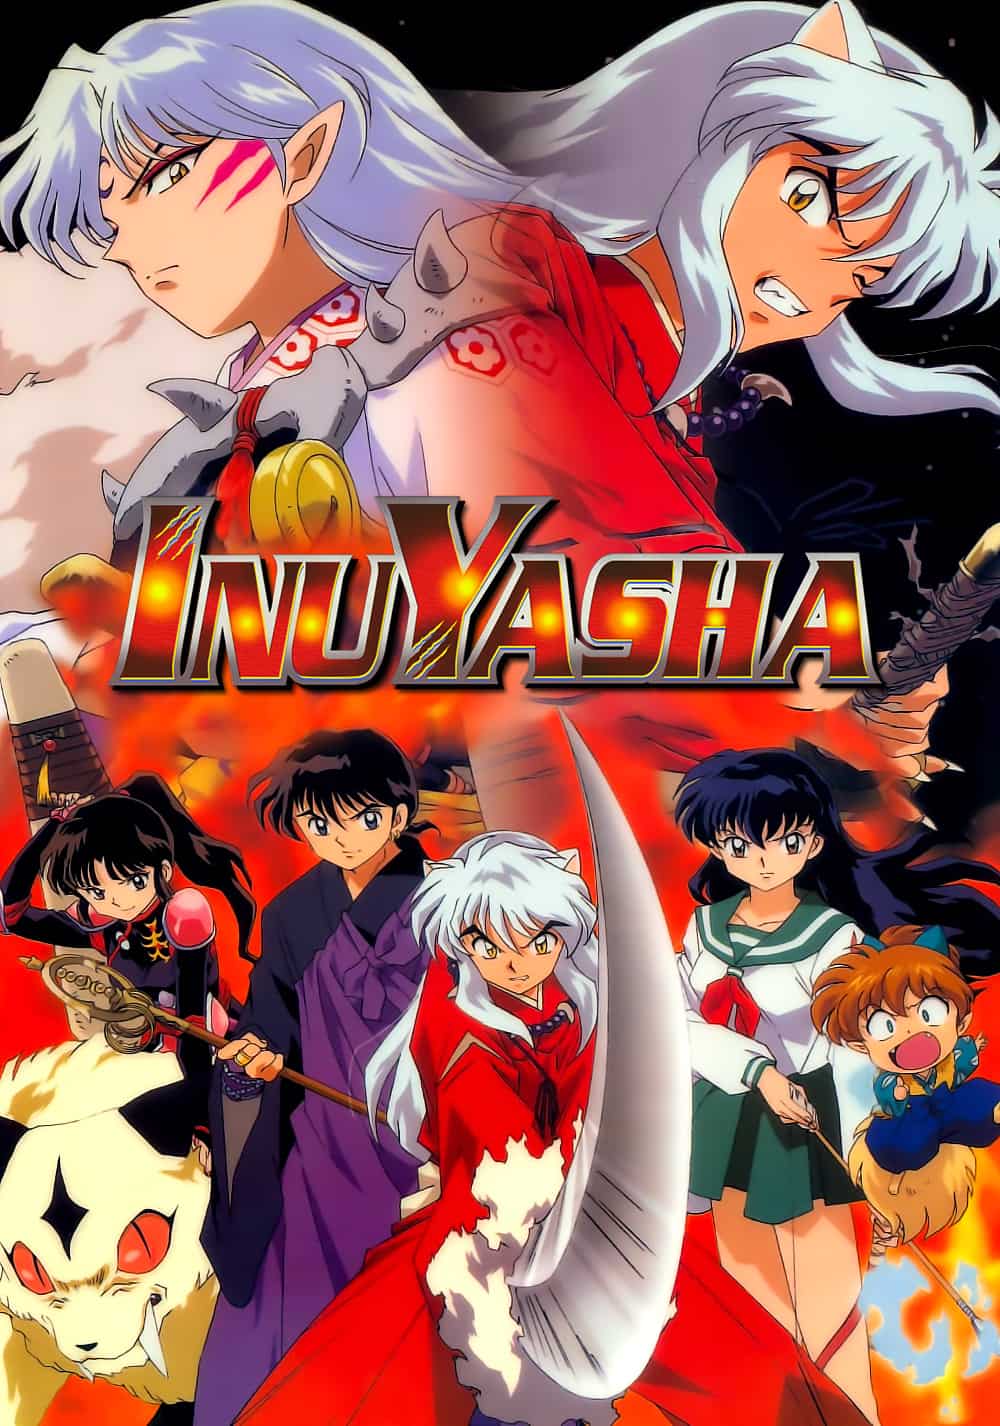 Inuyasha anime official cover art